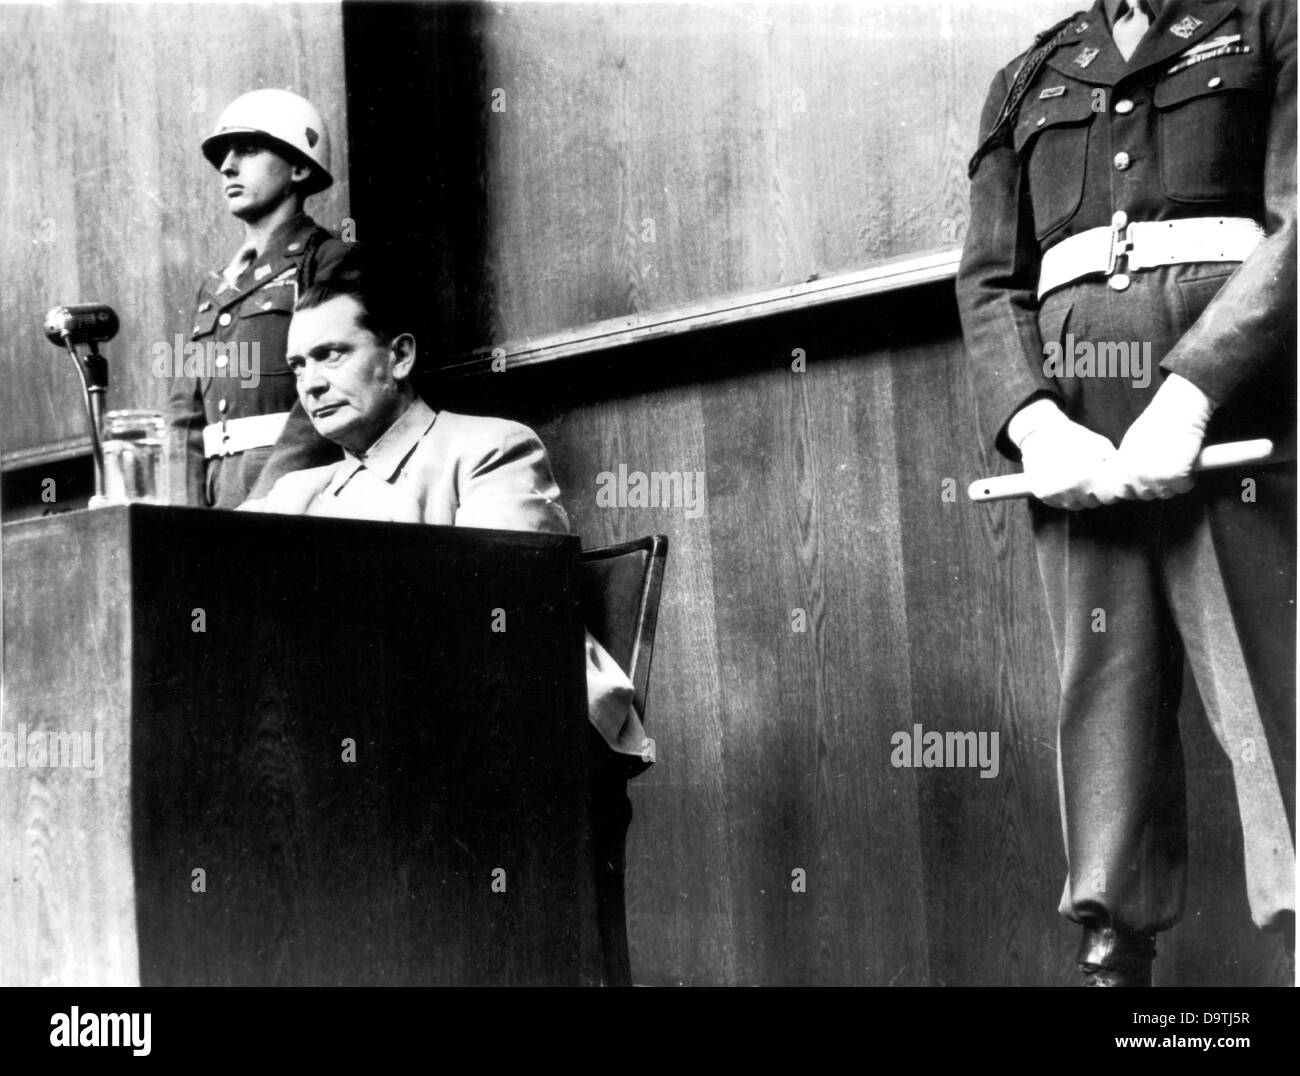 The picture by Soviet photographer Yevgeny Khaldei shows Hermann Göring, guarded by two US military policemen during the Nuremberg Trials in 1946.    Photo: Yevgeny Khaldei Stock Photo